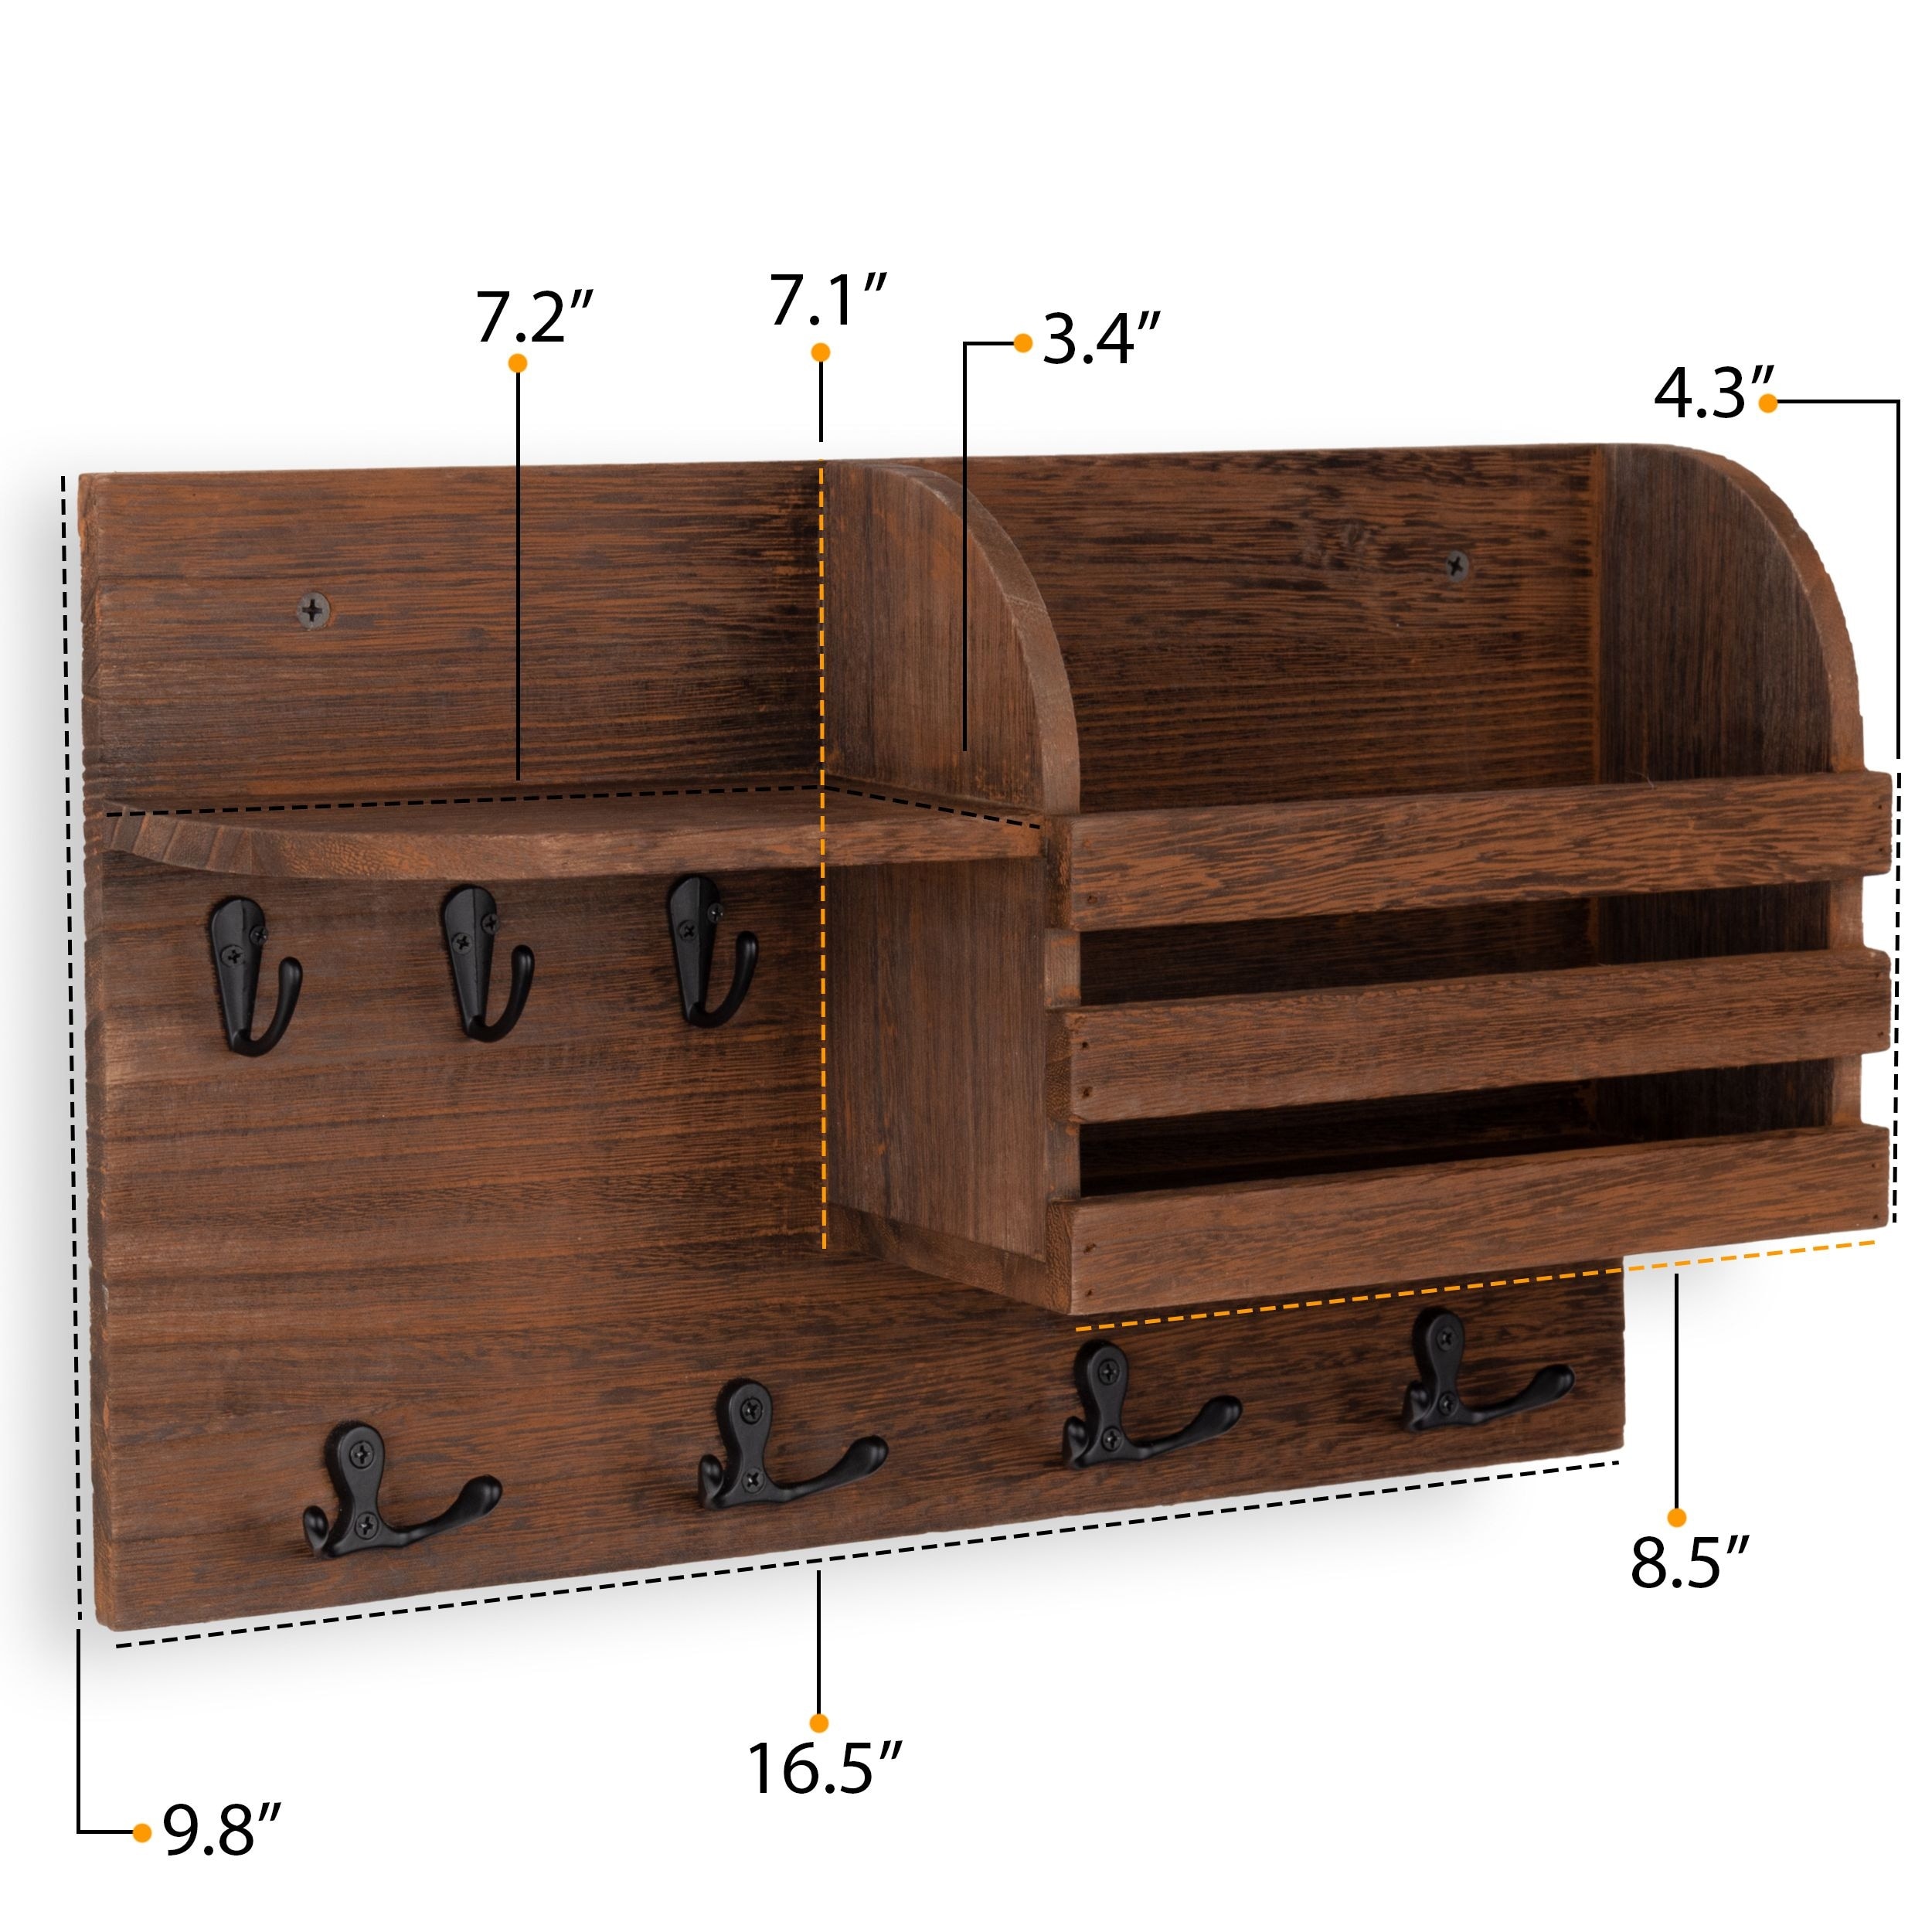 Floating Shelf Organizer for Entryway Kitchen-16x10 Decorative Key Hanger for Wall Living Room Bedroom Rustic Wooden Storage Mail Holder with 5 Key Hooks